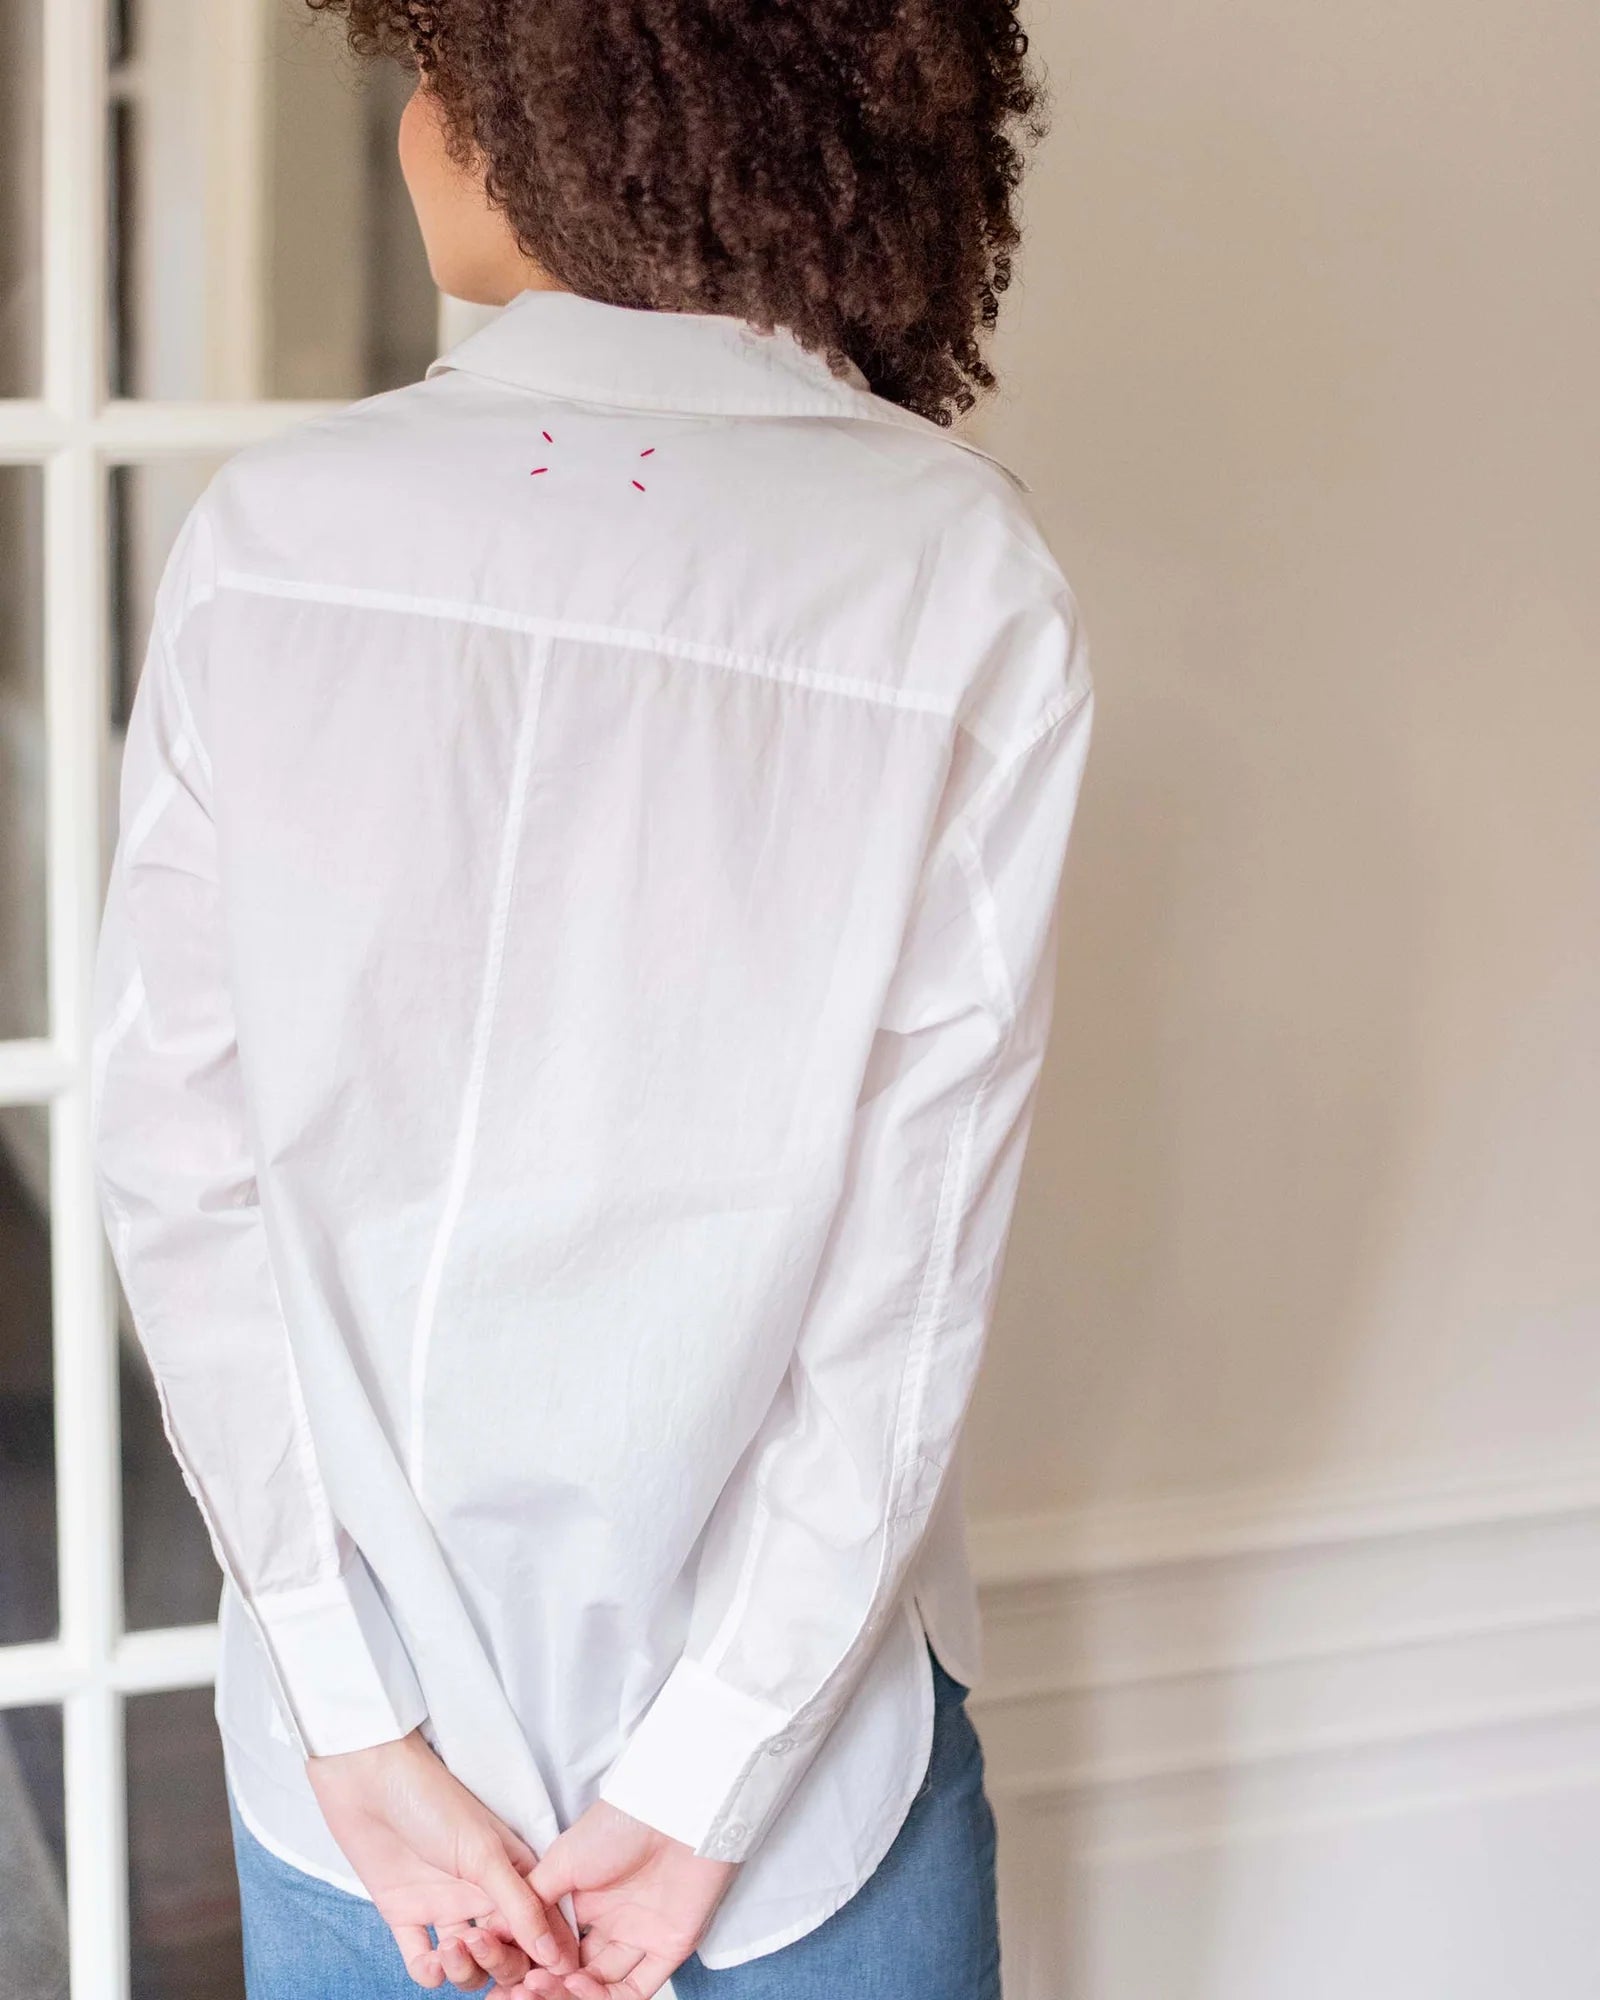 Mersea Bronte Relaxed Button Up Top